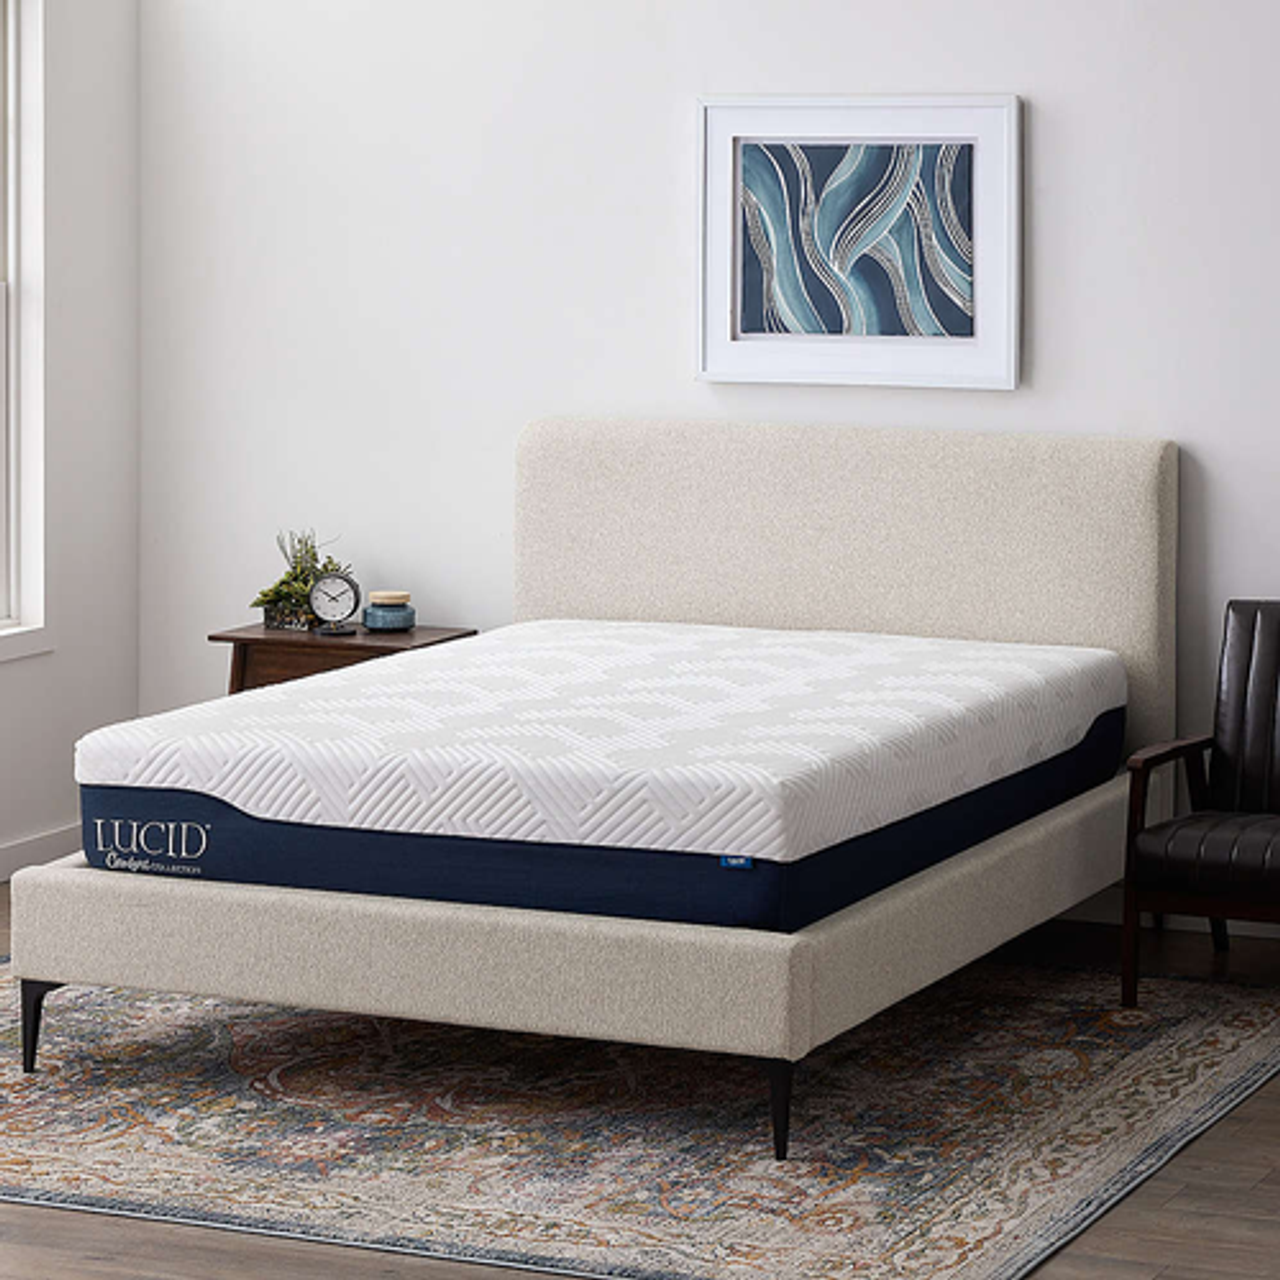 Lucid Comfort Collection - 10-inch Memory Foam Hybrid Mattress - Cal King - White